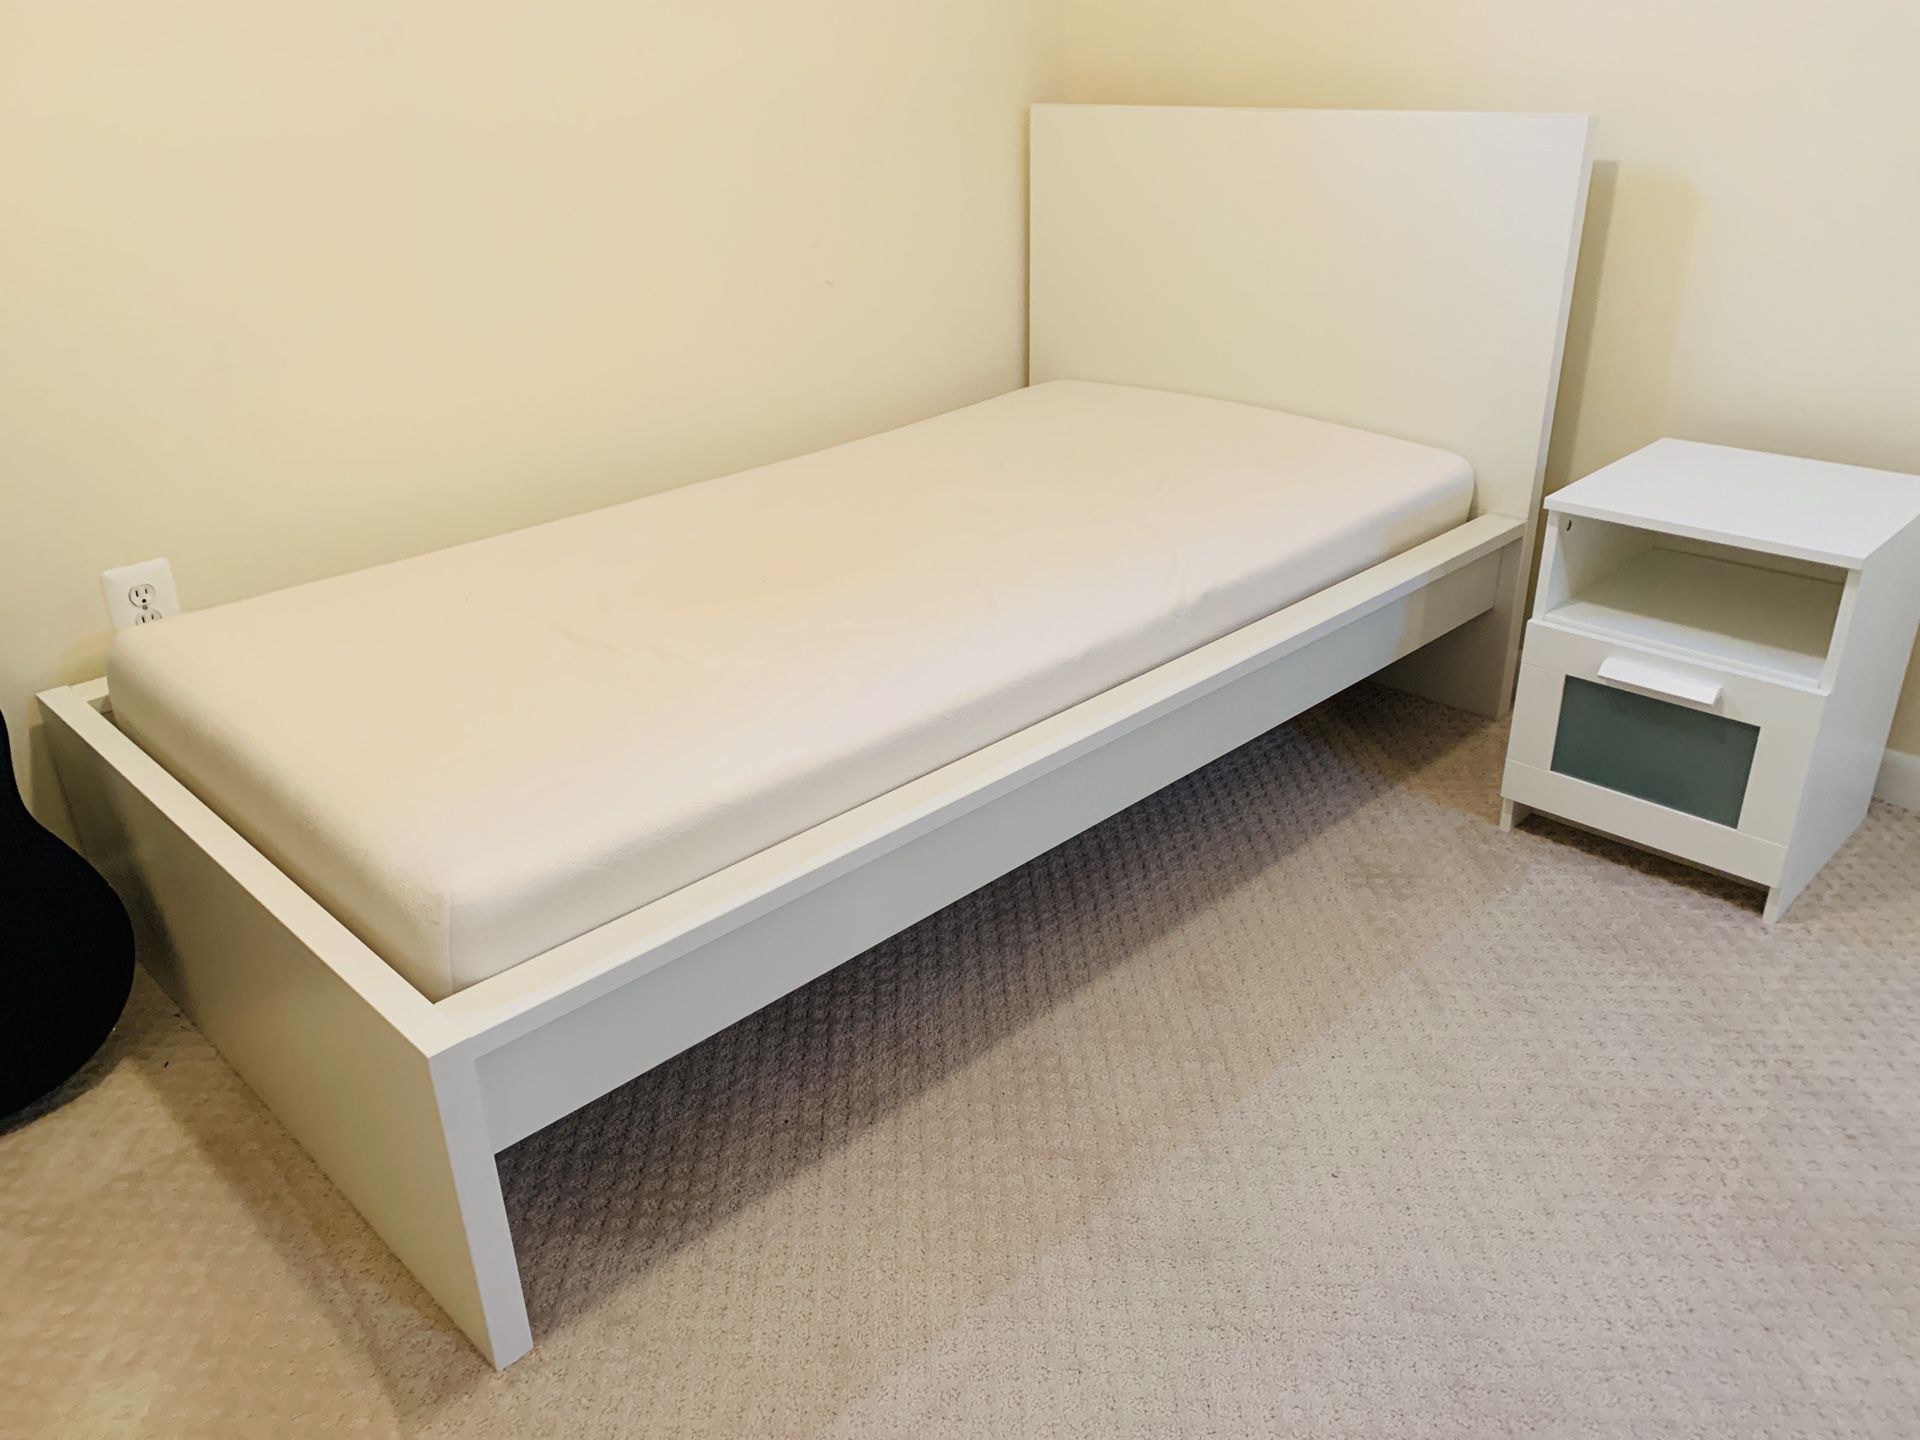 IKEA Luroy bed, mattress and night stand